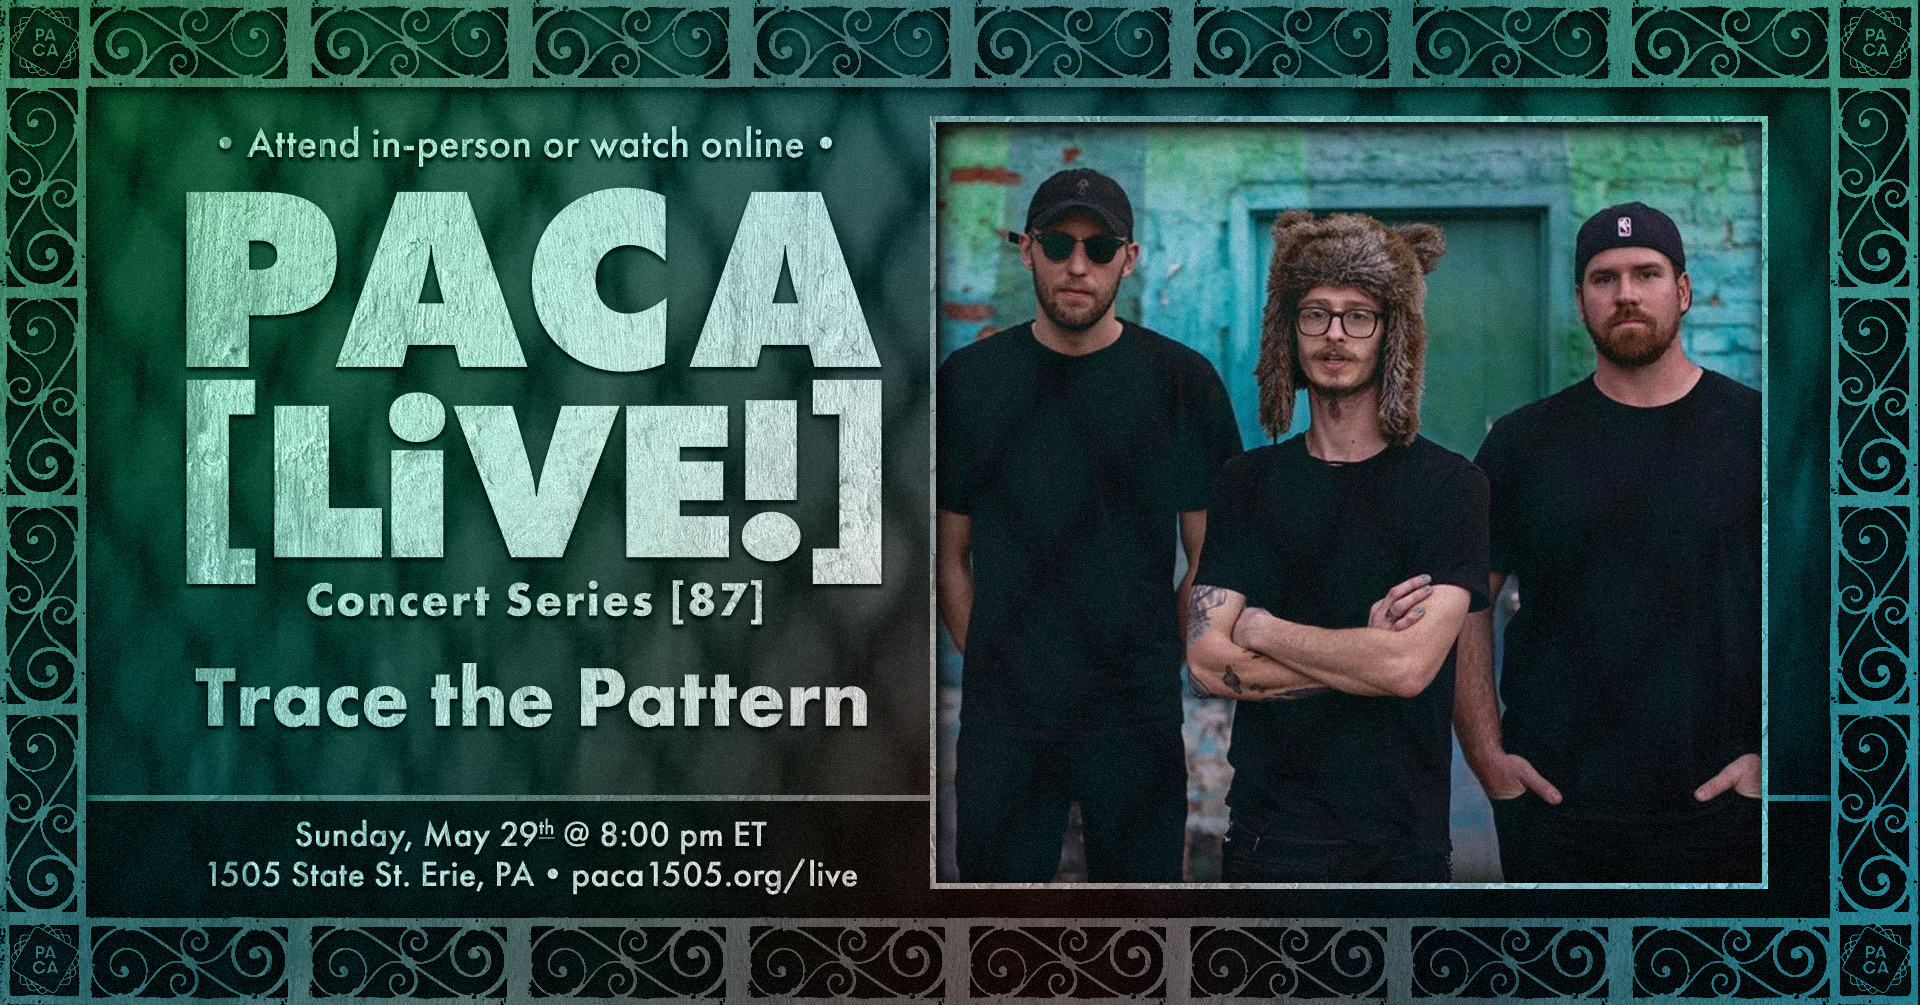 Trace the Pattern • PACA [LiVE!] Concert Series [87]